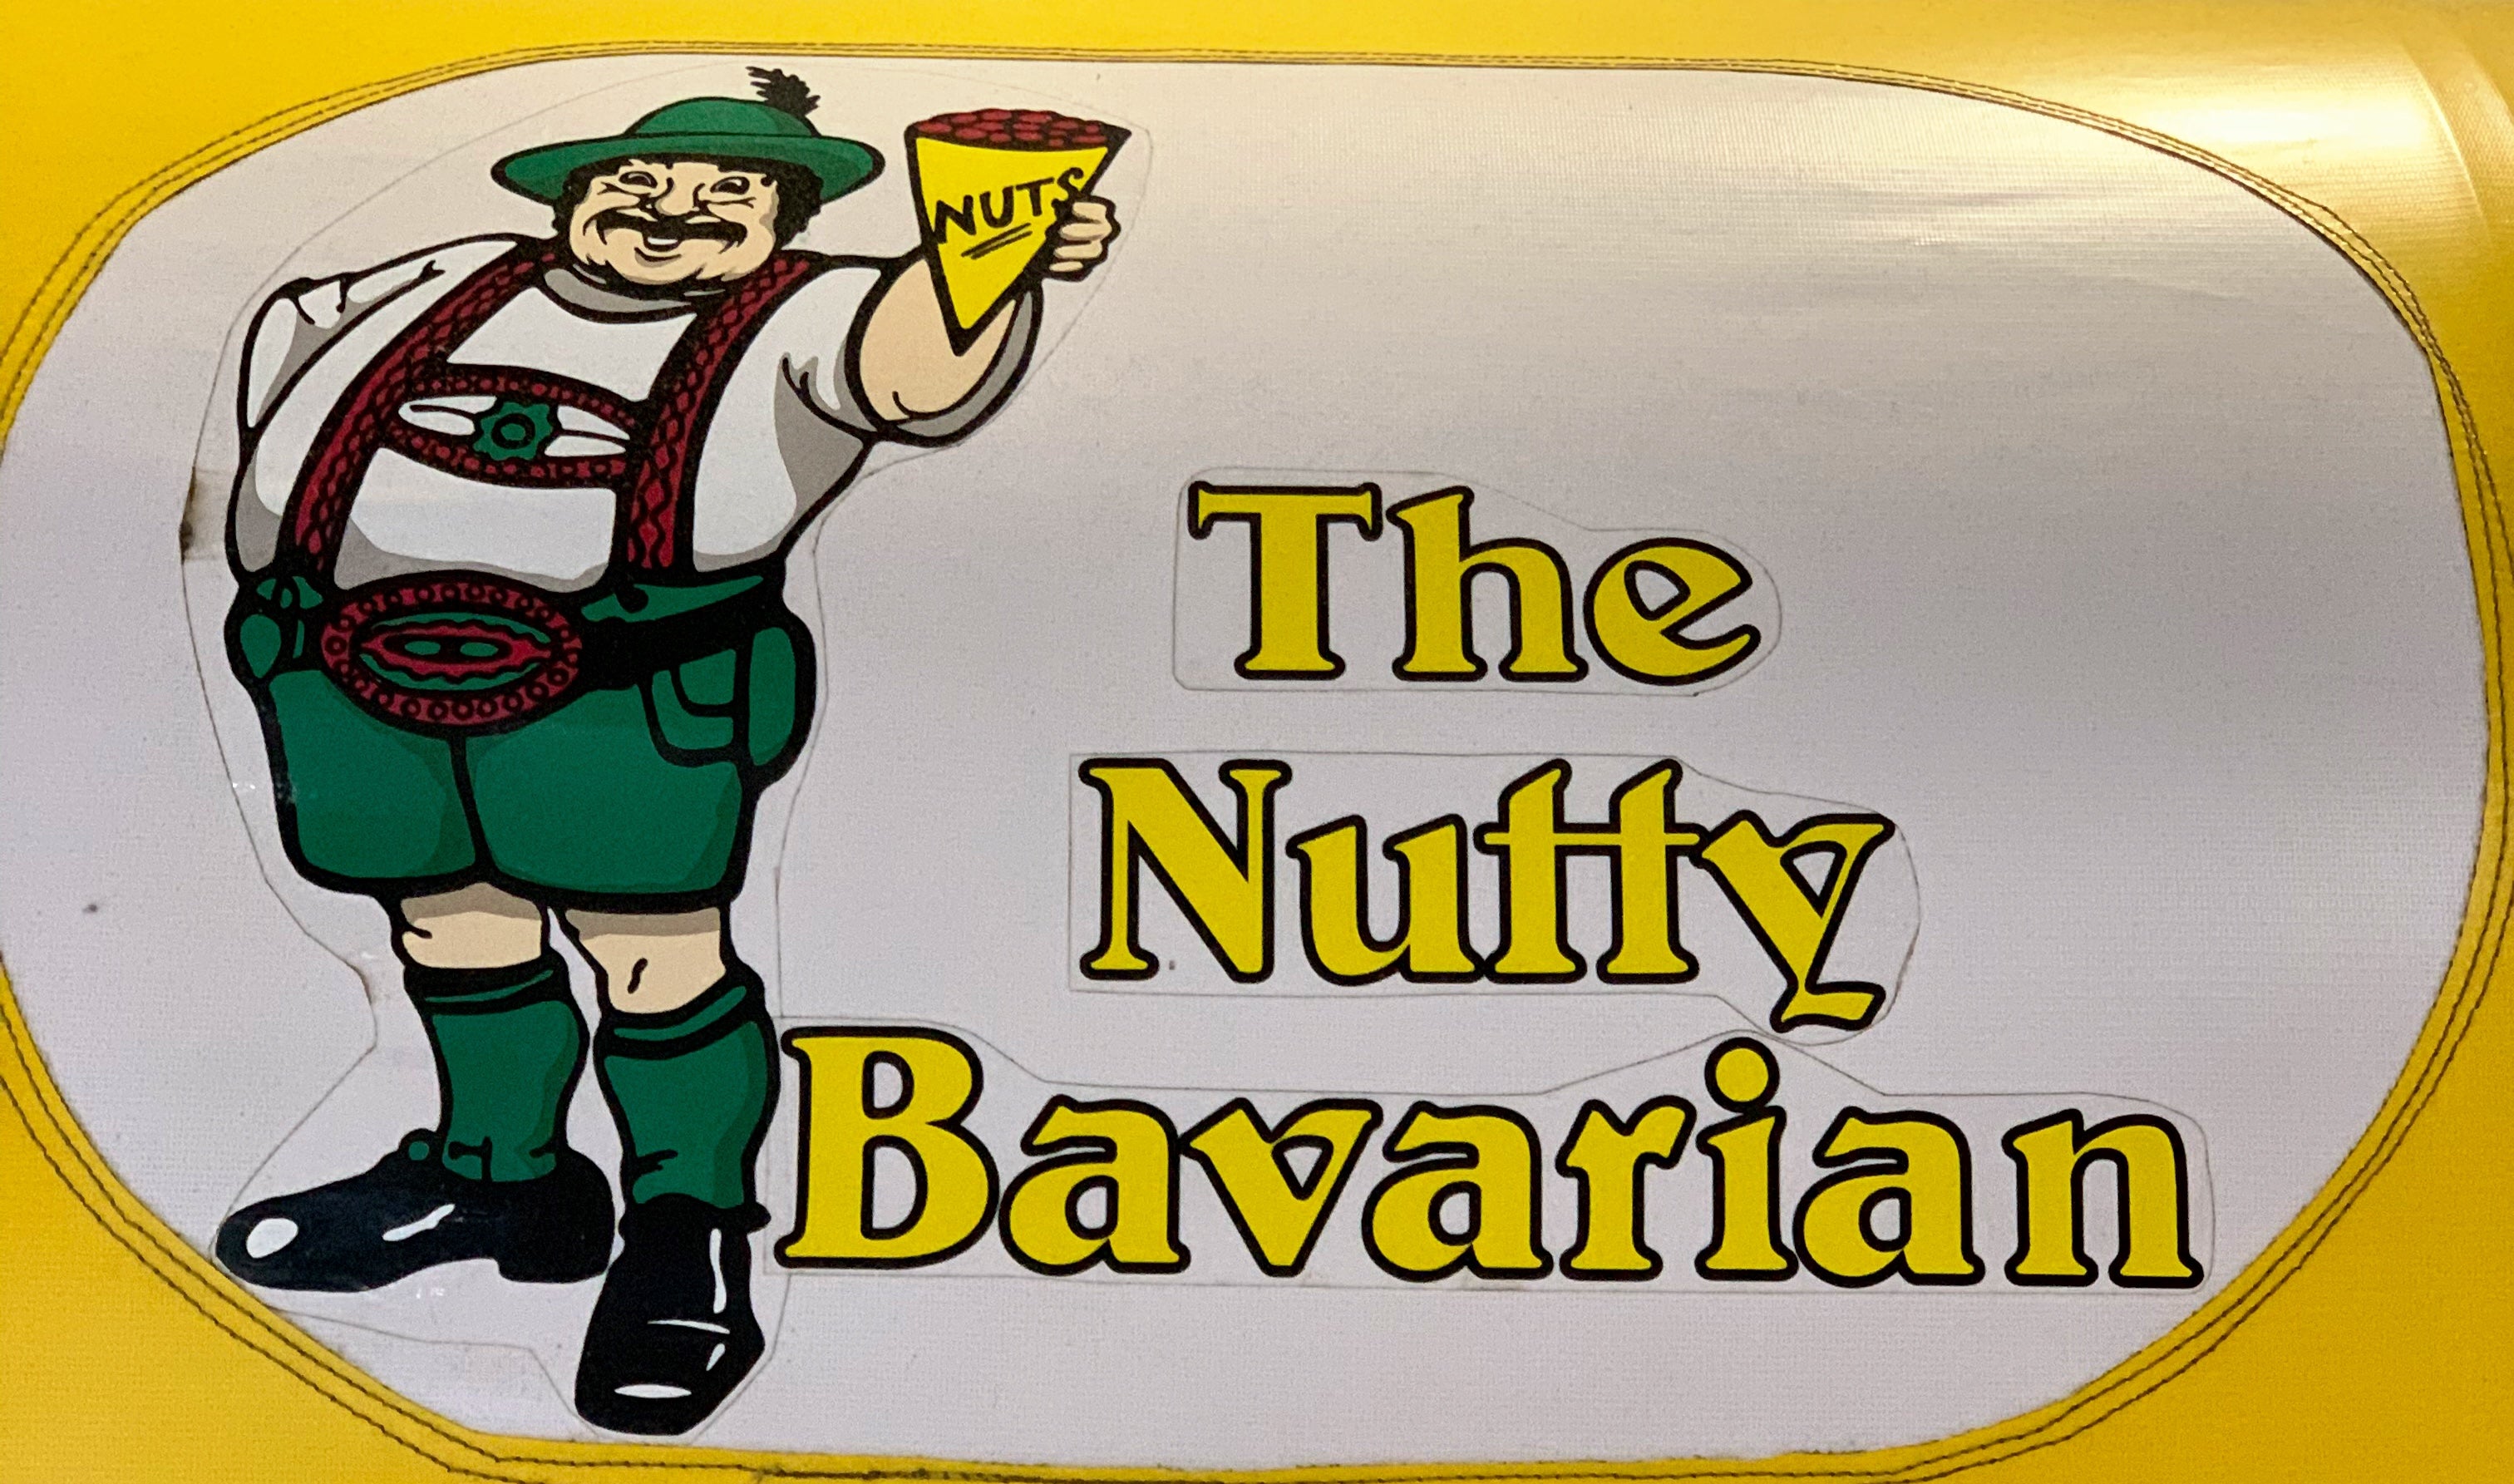 Nutty Bavarian: Sections 101, 116, 316